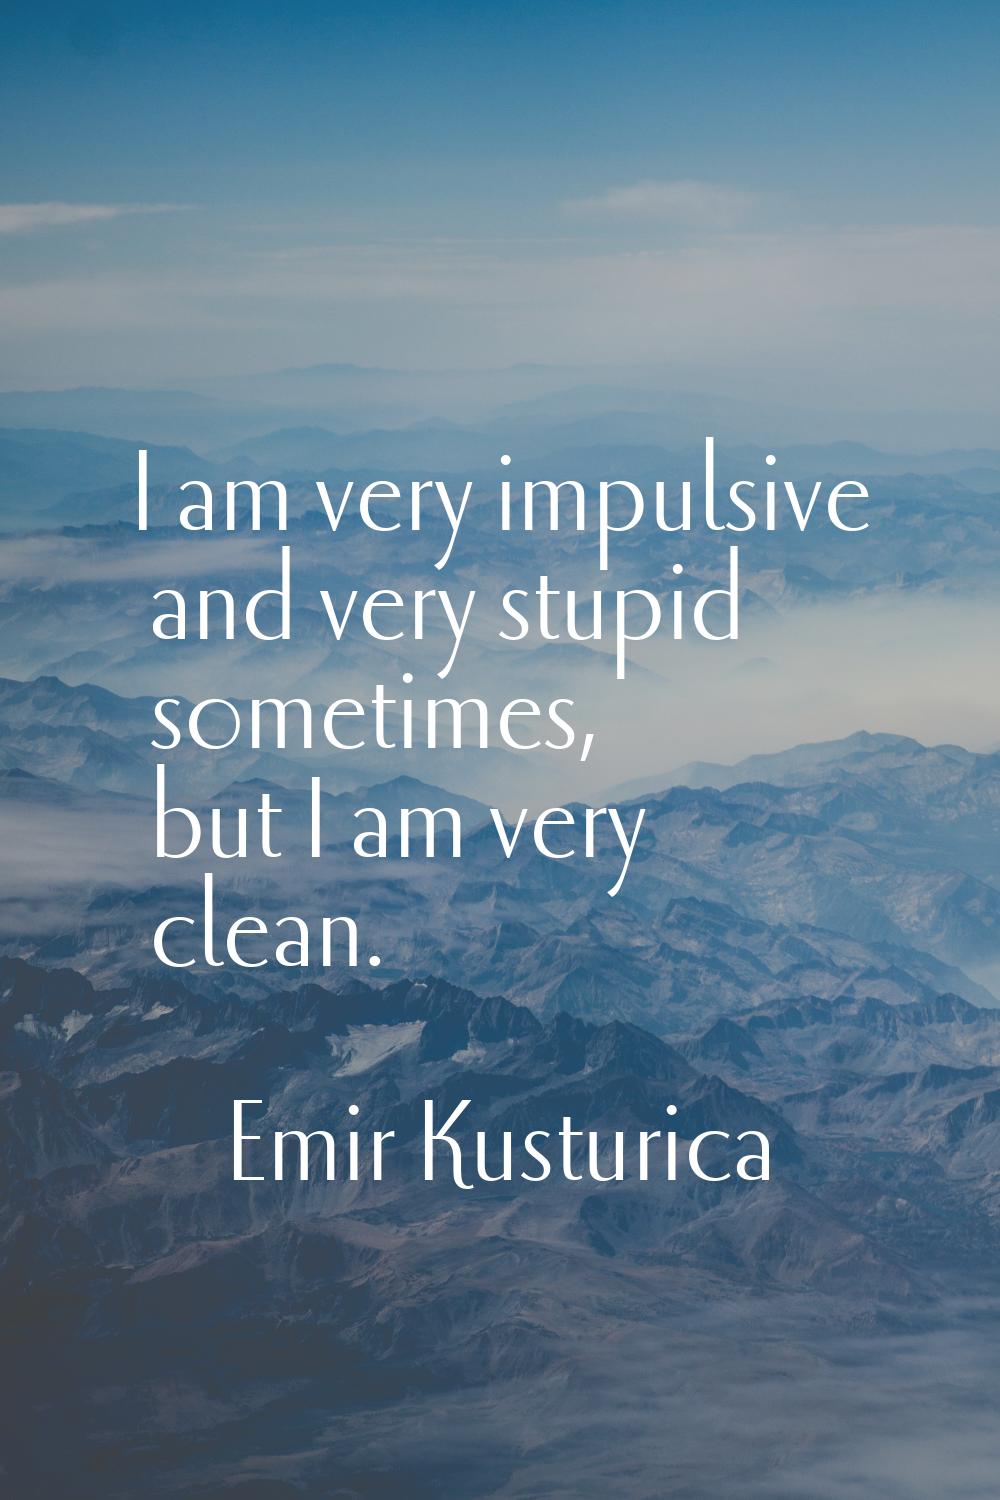 I am very impulsive and very stupid sometimes, but I am very clean.